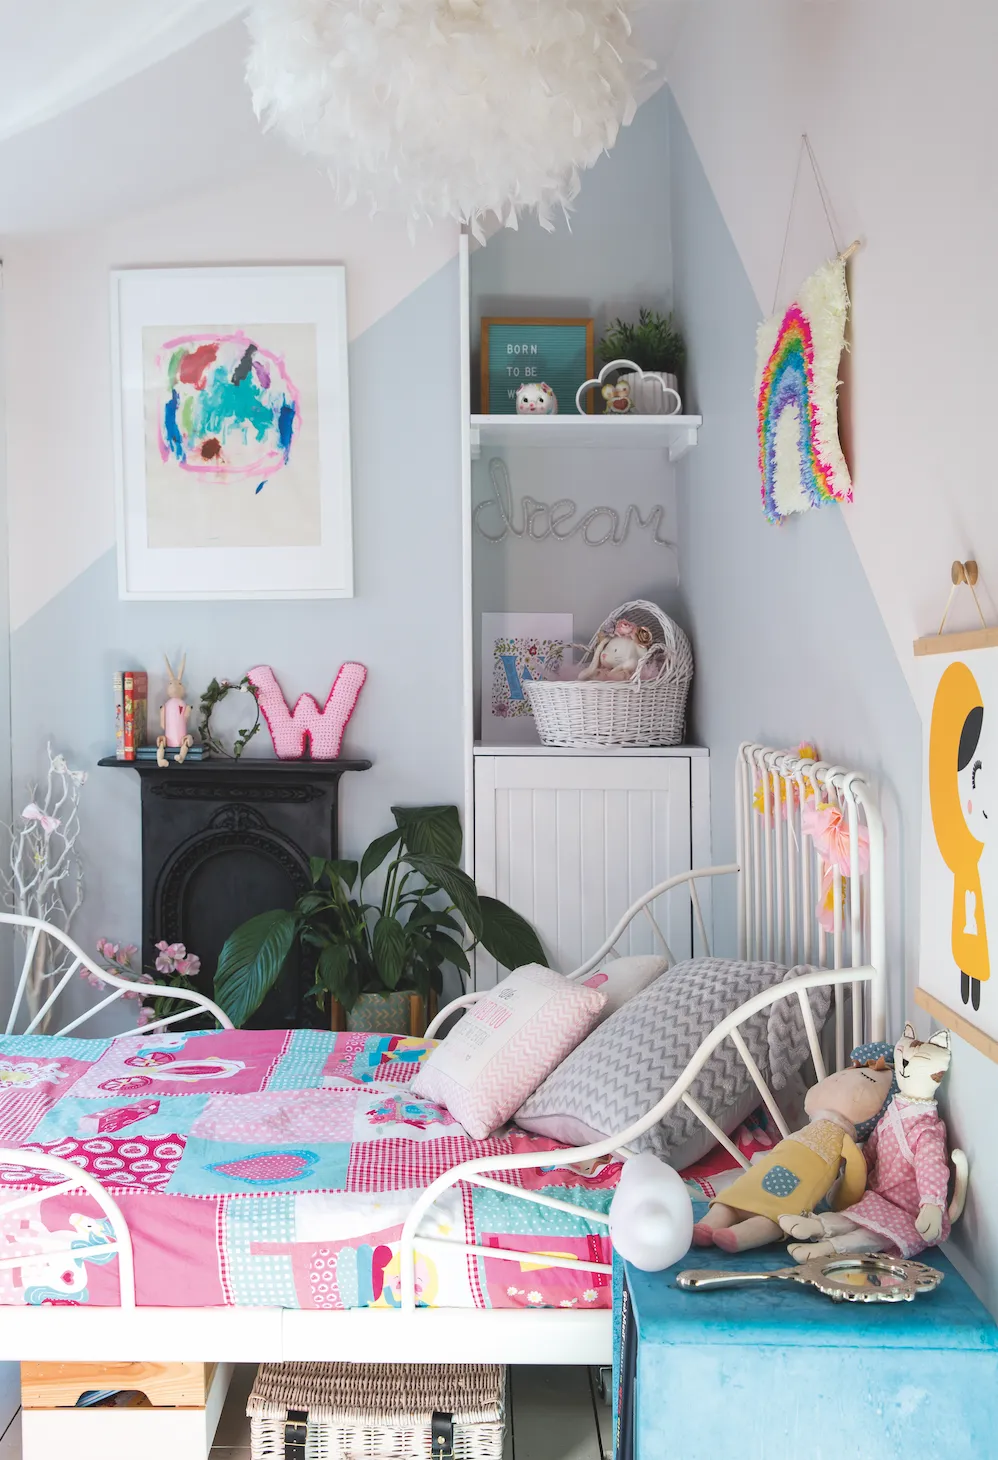 Real life home: 'getting creative with paint and artwork lets our home grow with our family'